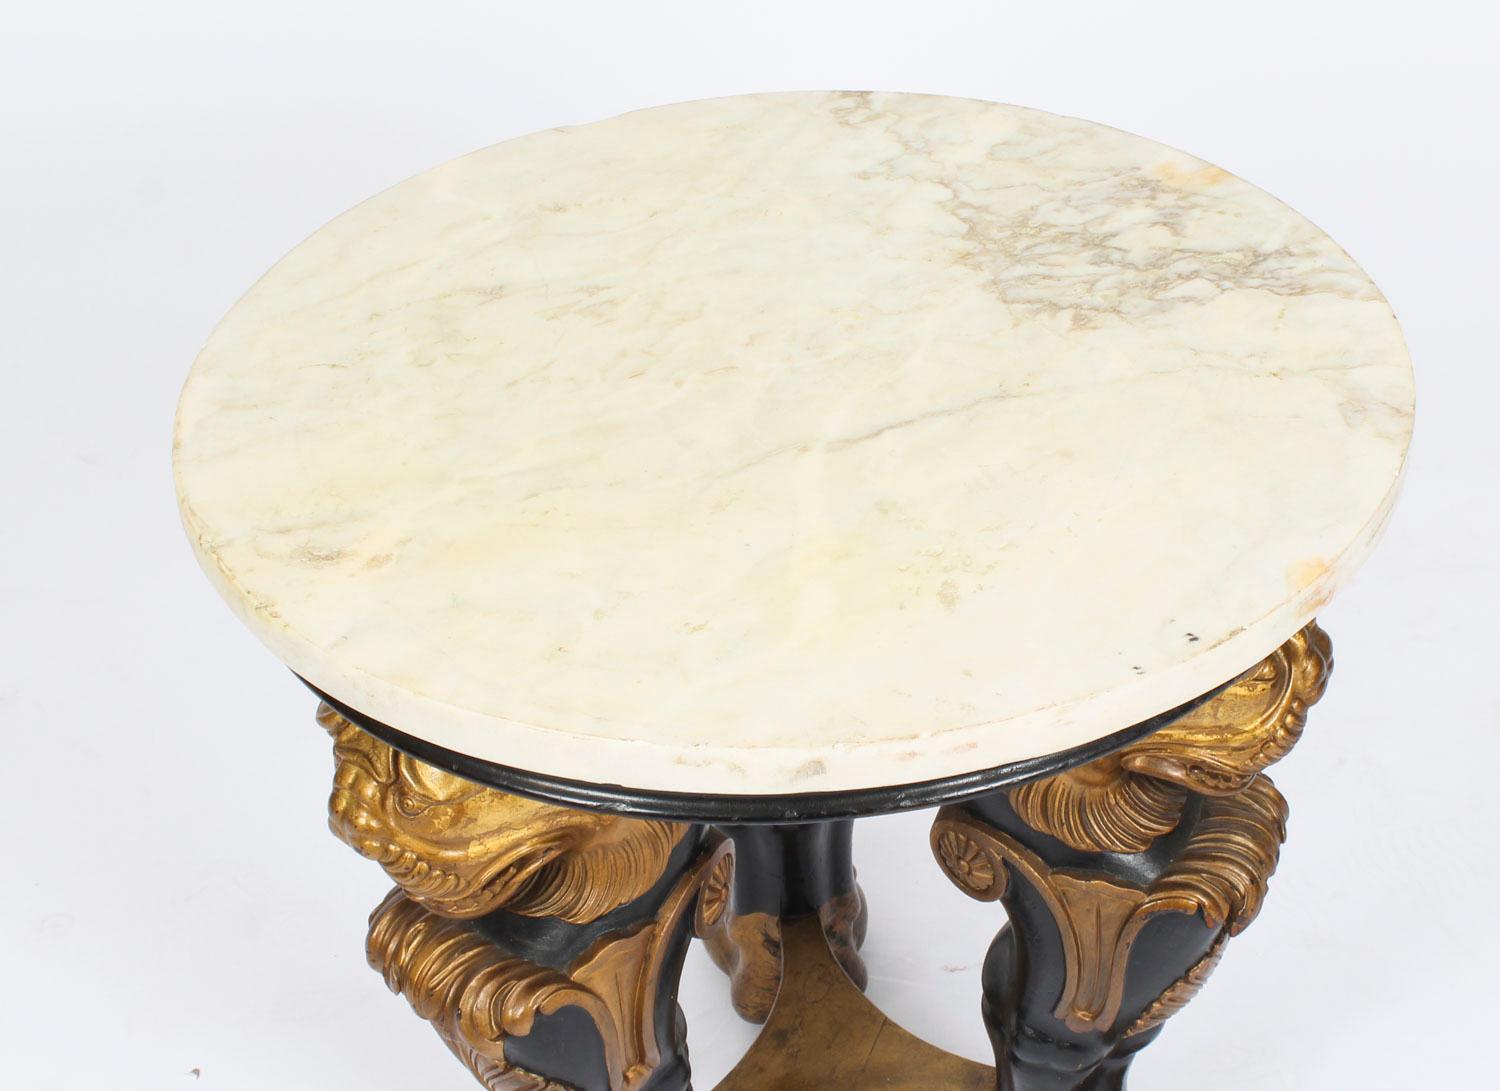 Antique Regency Revival Marble-Top Occasional Table, 19th Century 1